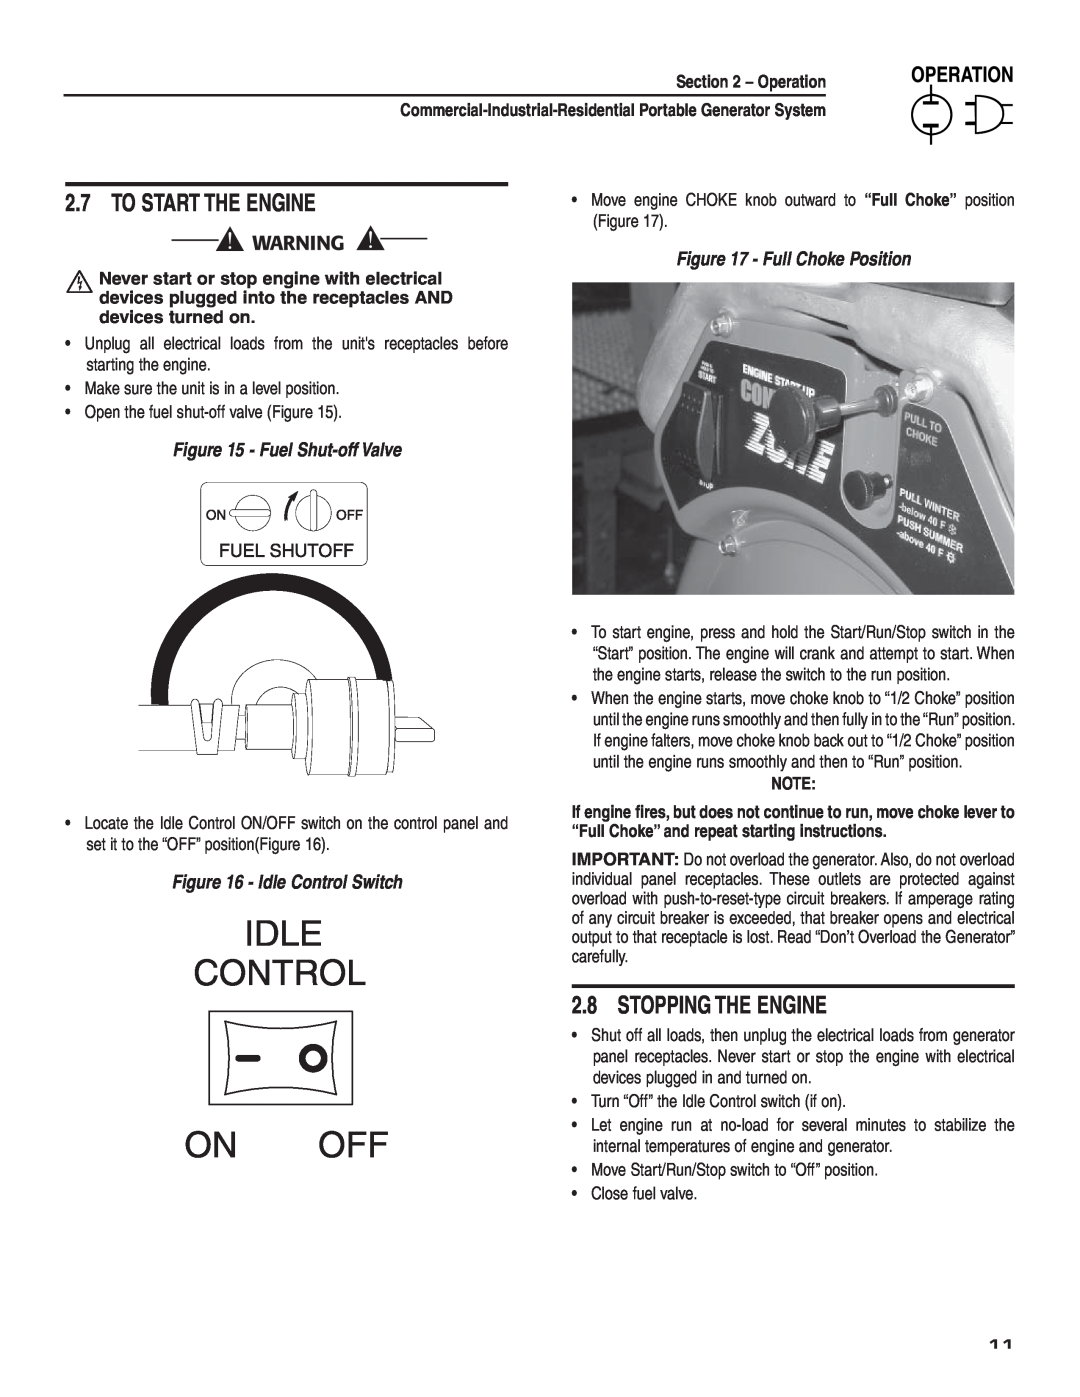 Guardian Technologies 004582-2 To Start The Engine, Stopping The Engine, Fuel Shut-offValve, Full Choke Position 